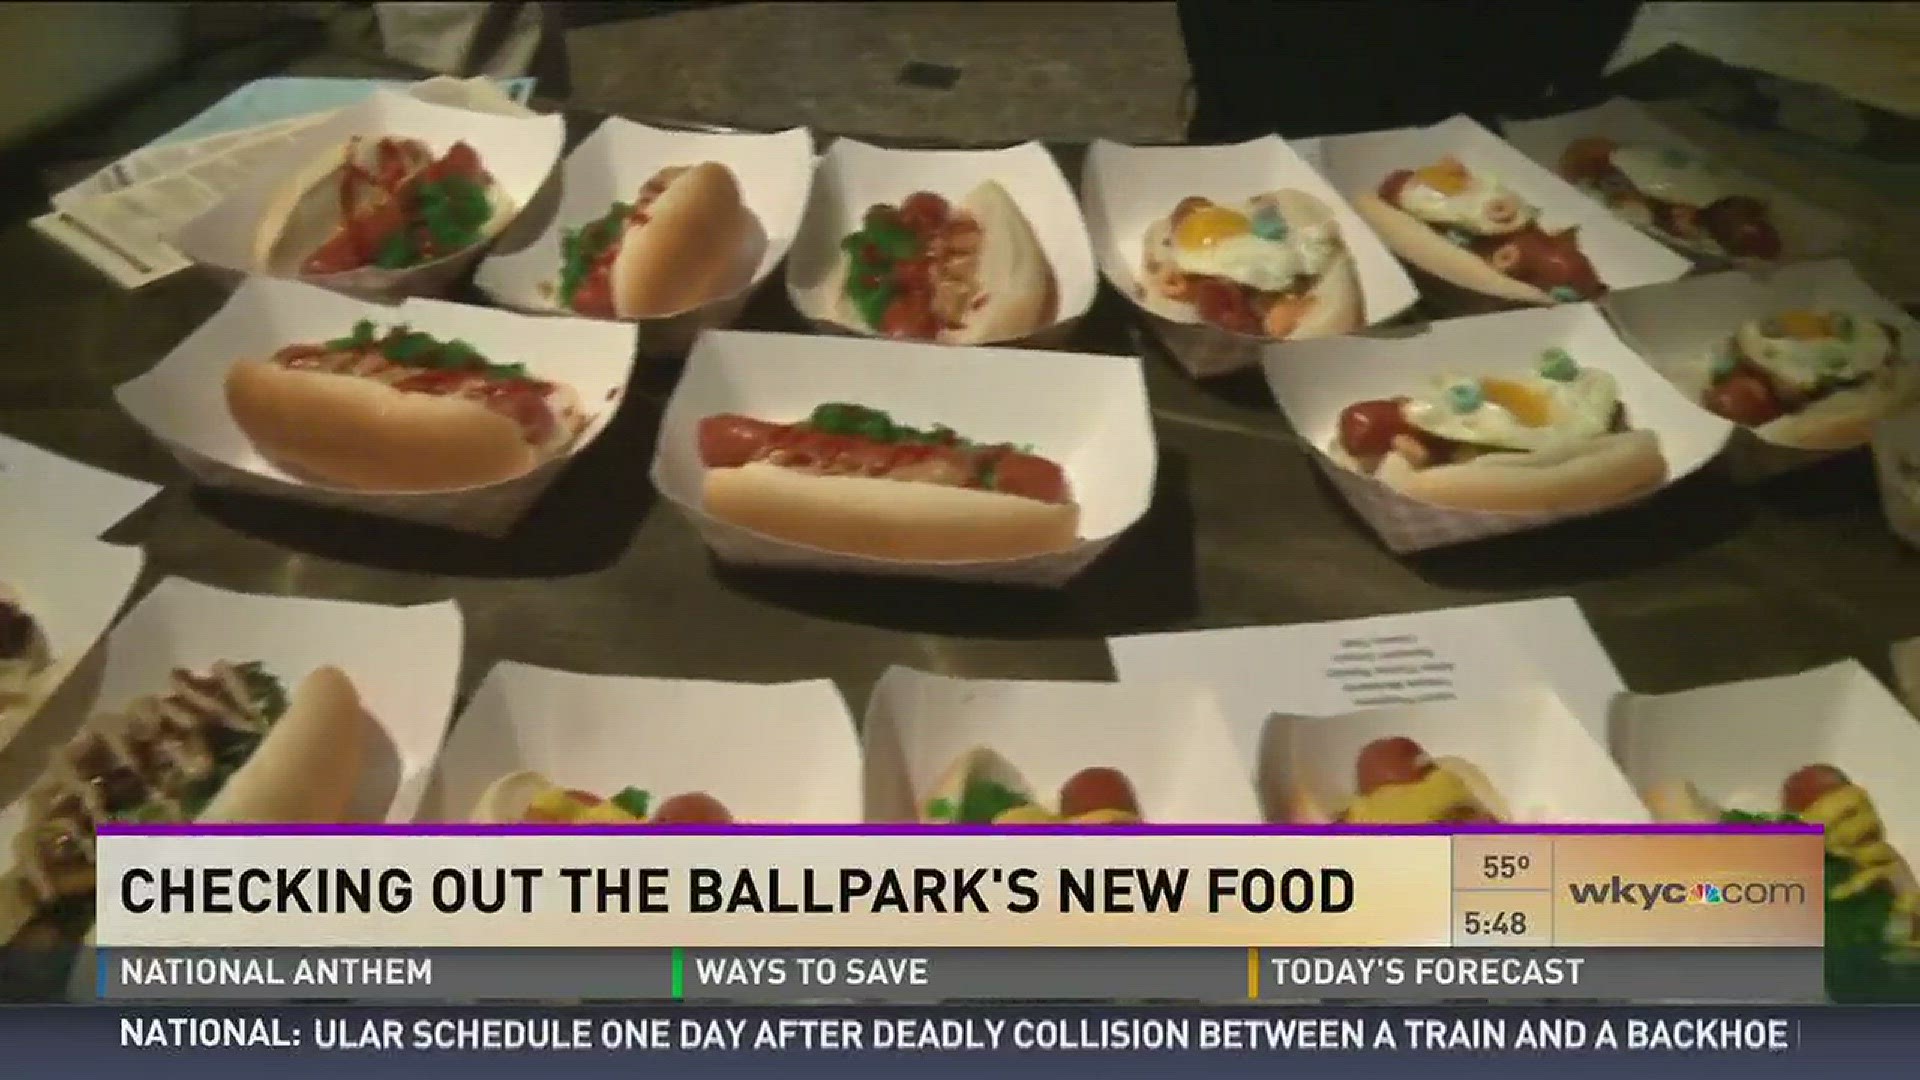 Checking out the ballpark's new food